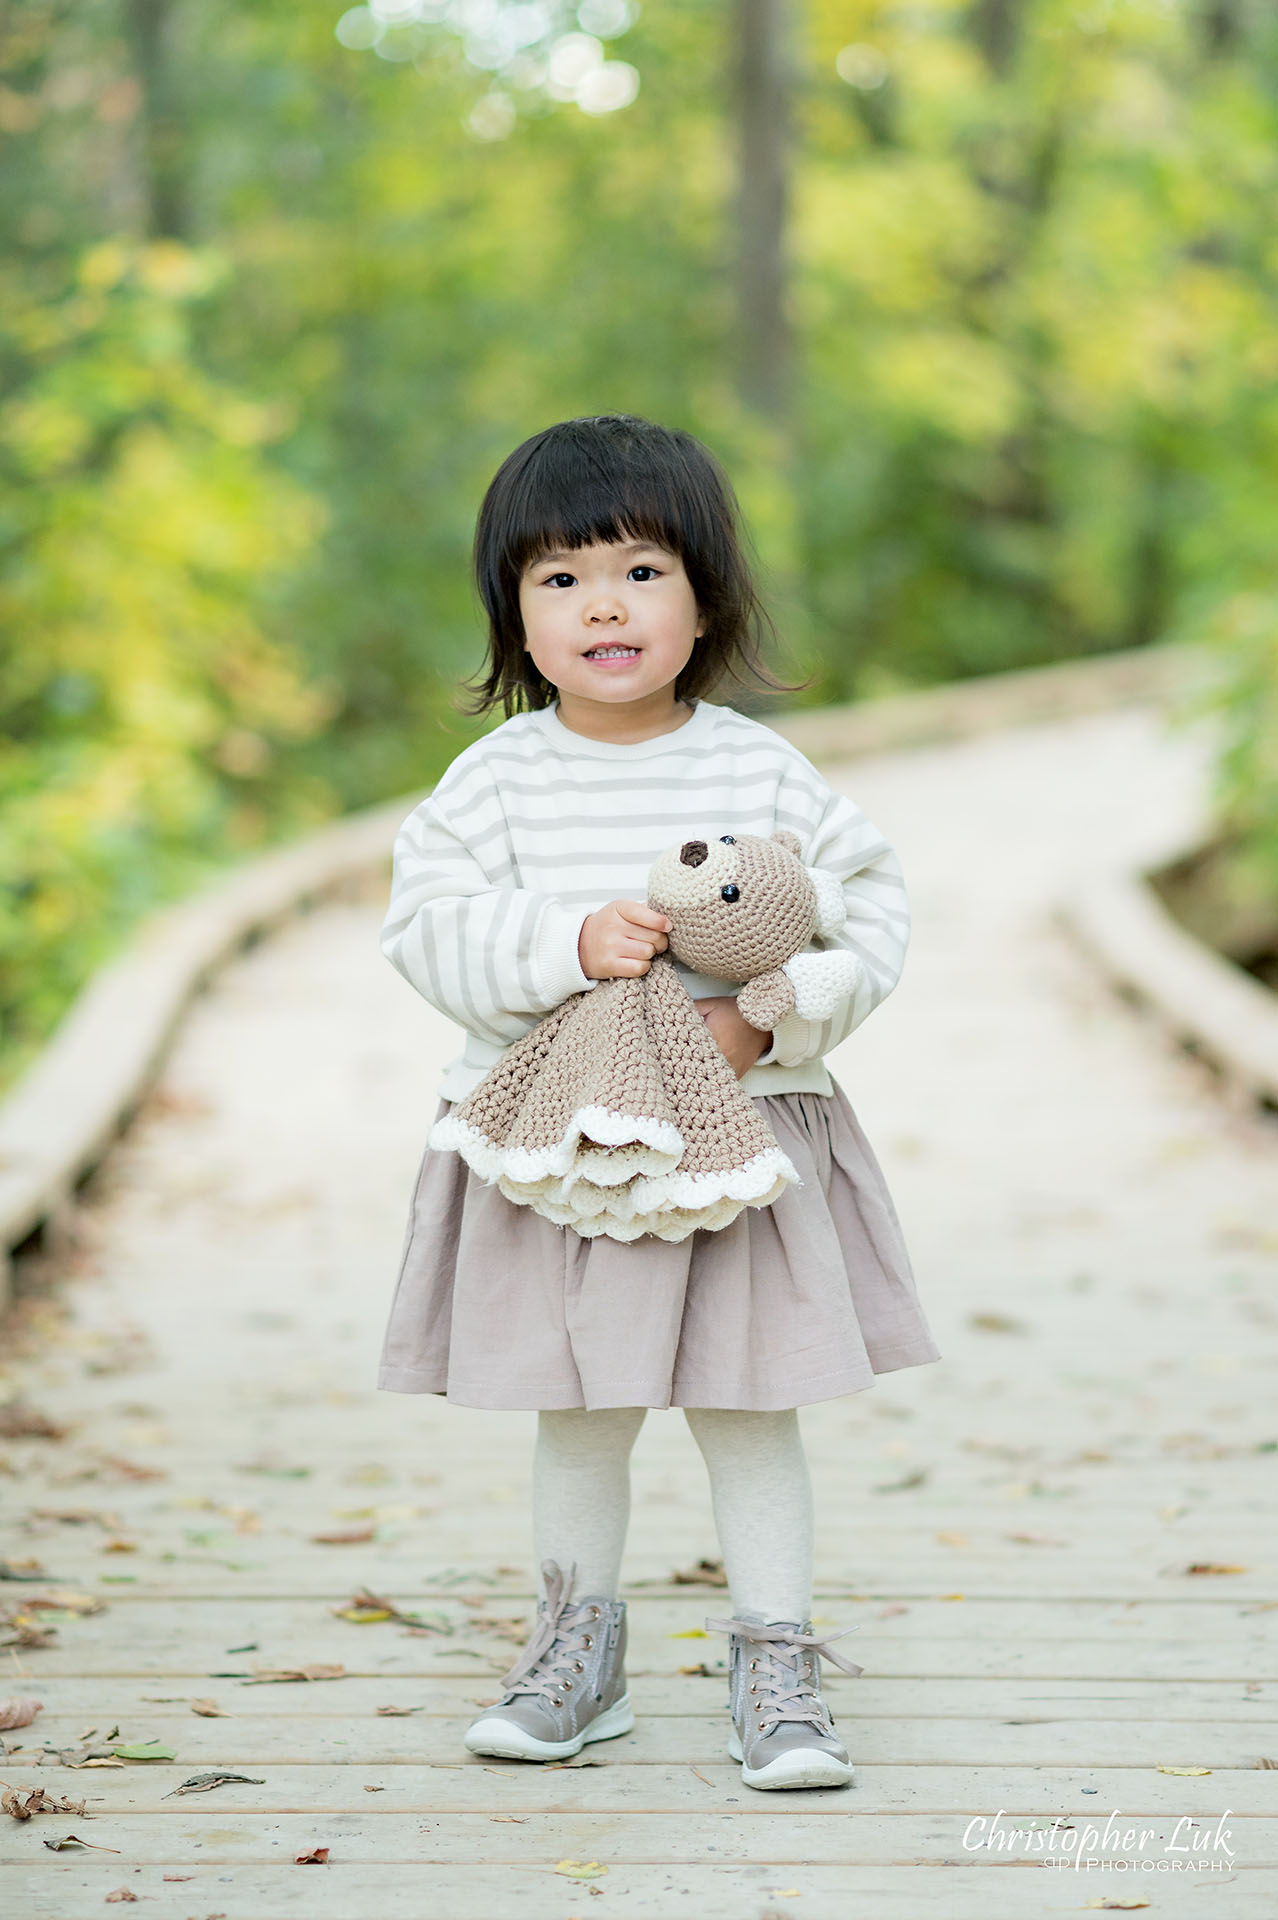 Christopher Luk Markham Family Photographer Autumn Leaves Fall Season Candid Photojournalistic Natural Bright Timeless Daughter Sister Stuffed Animal Smile